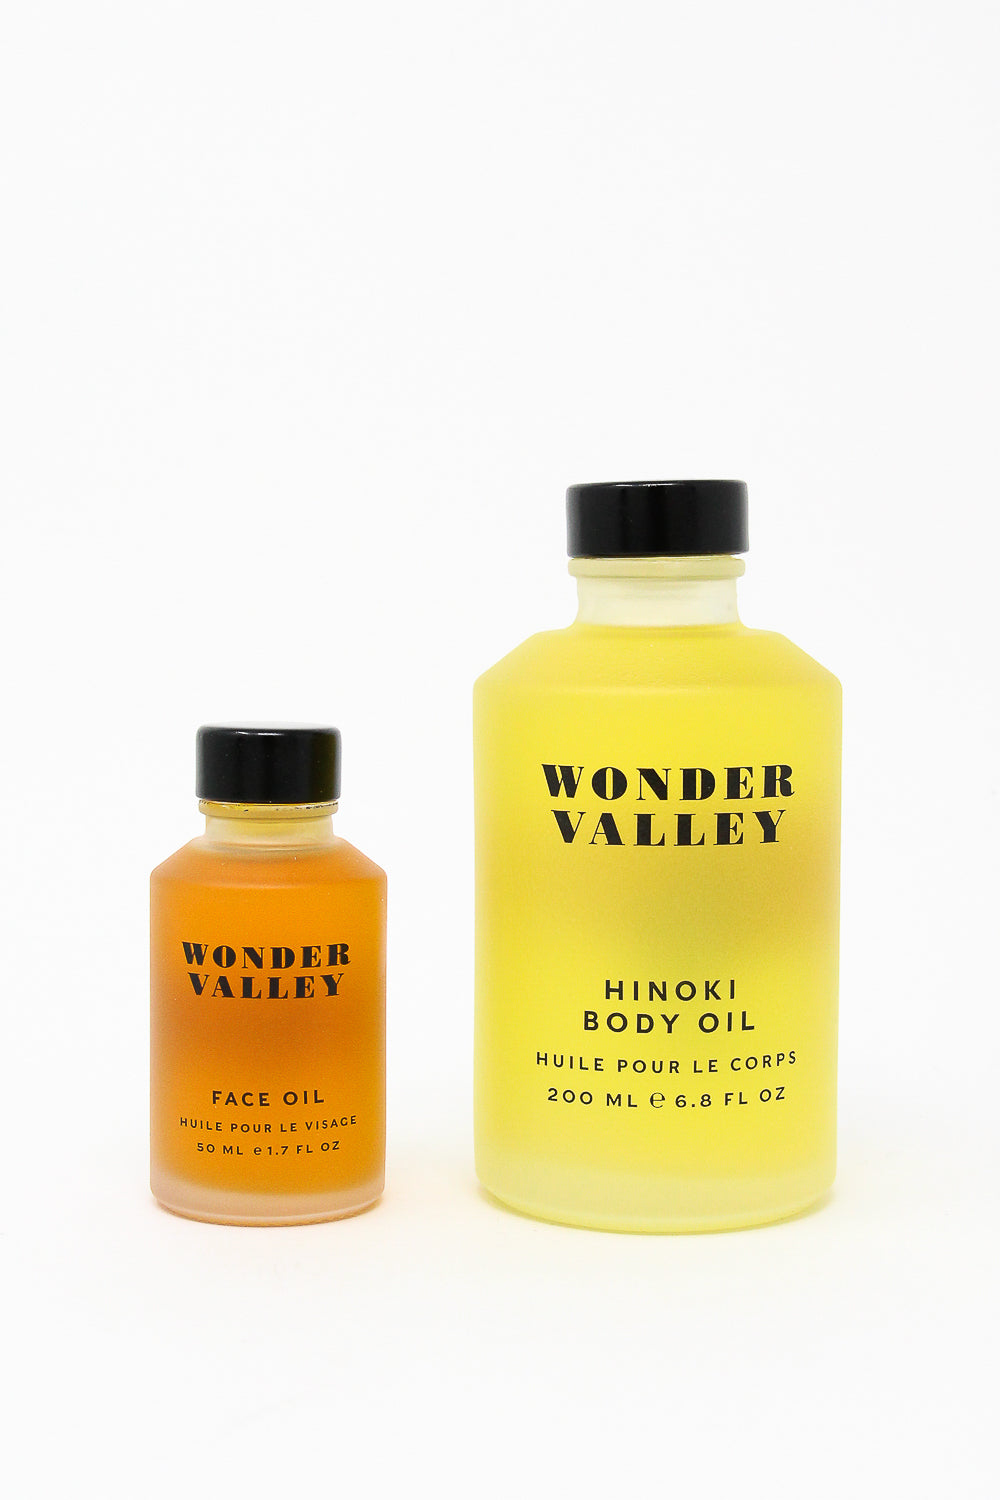 A bottle of Wonder Valley Hinoki Body Oil and a bottle of jojoba oil, perfect for skin-softening and hydration.